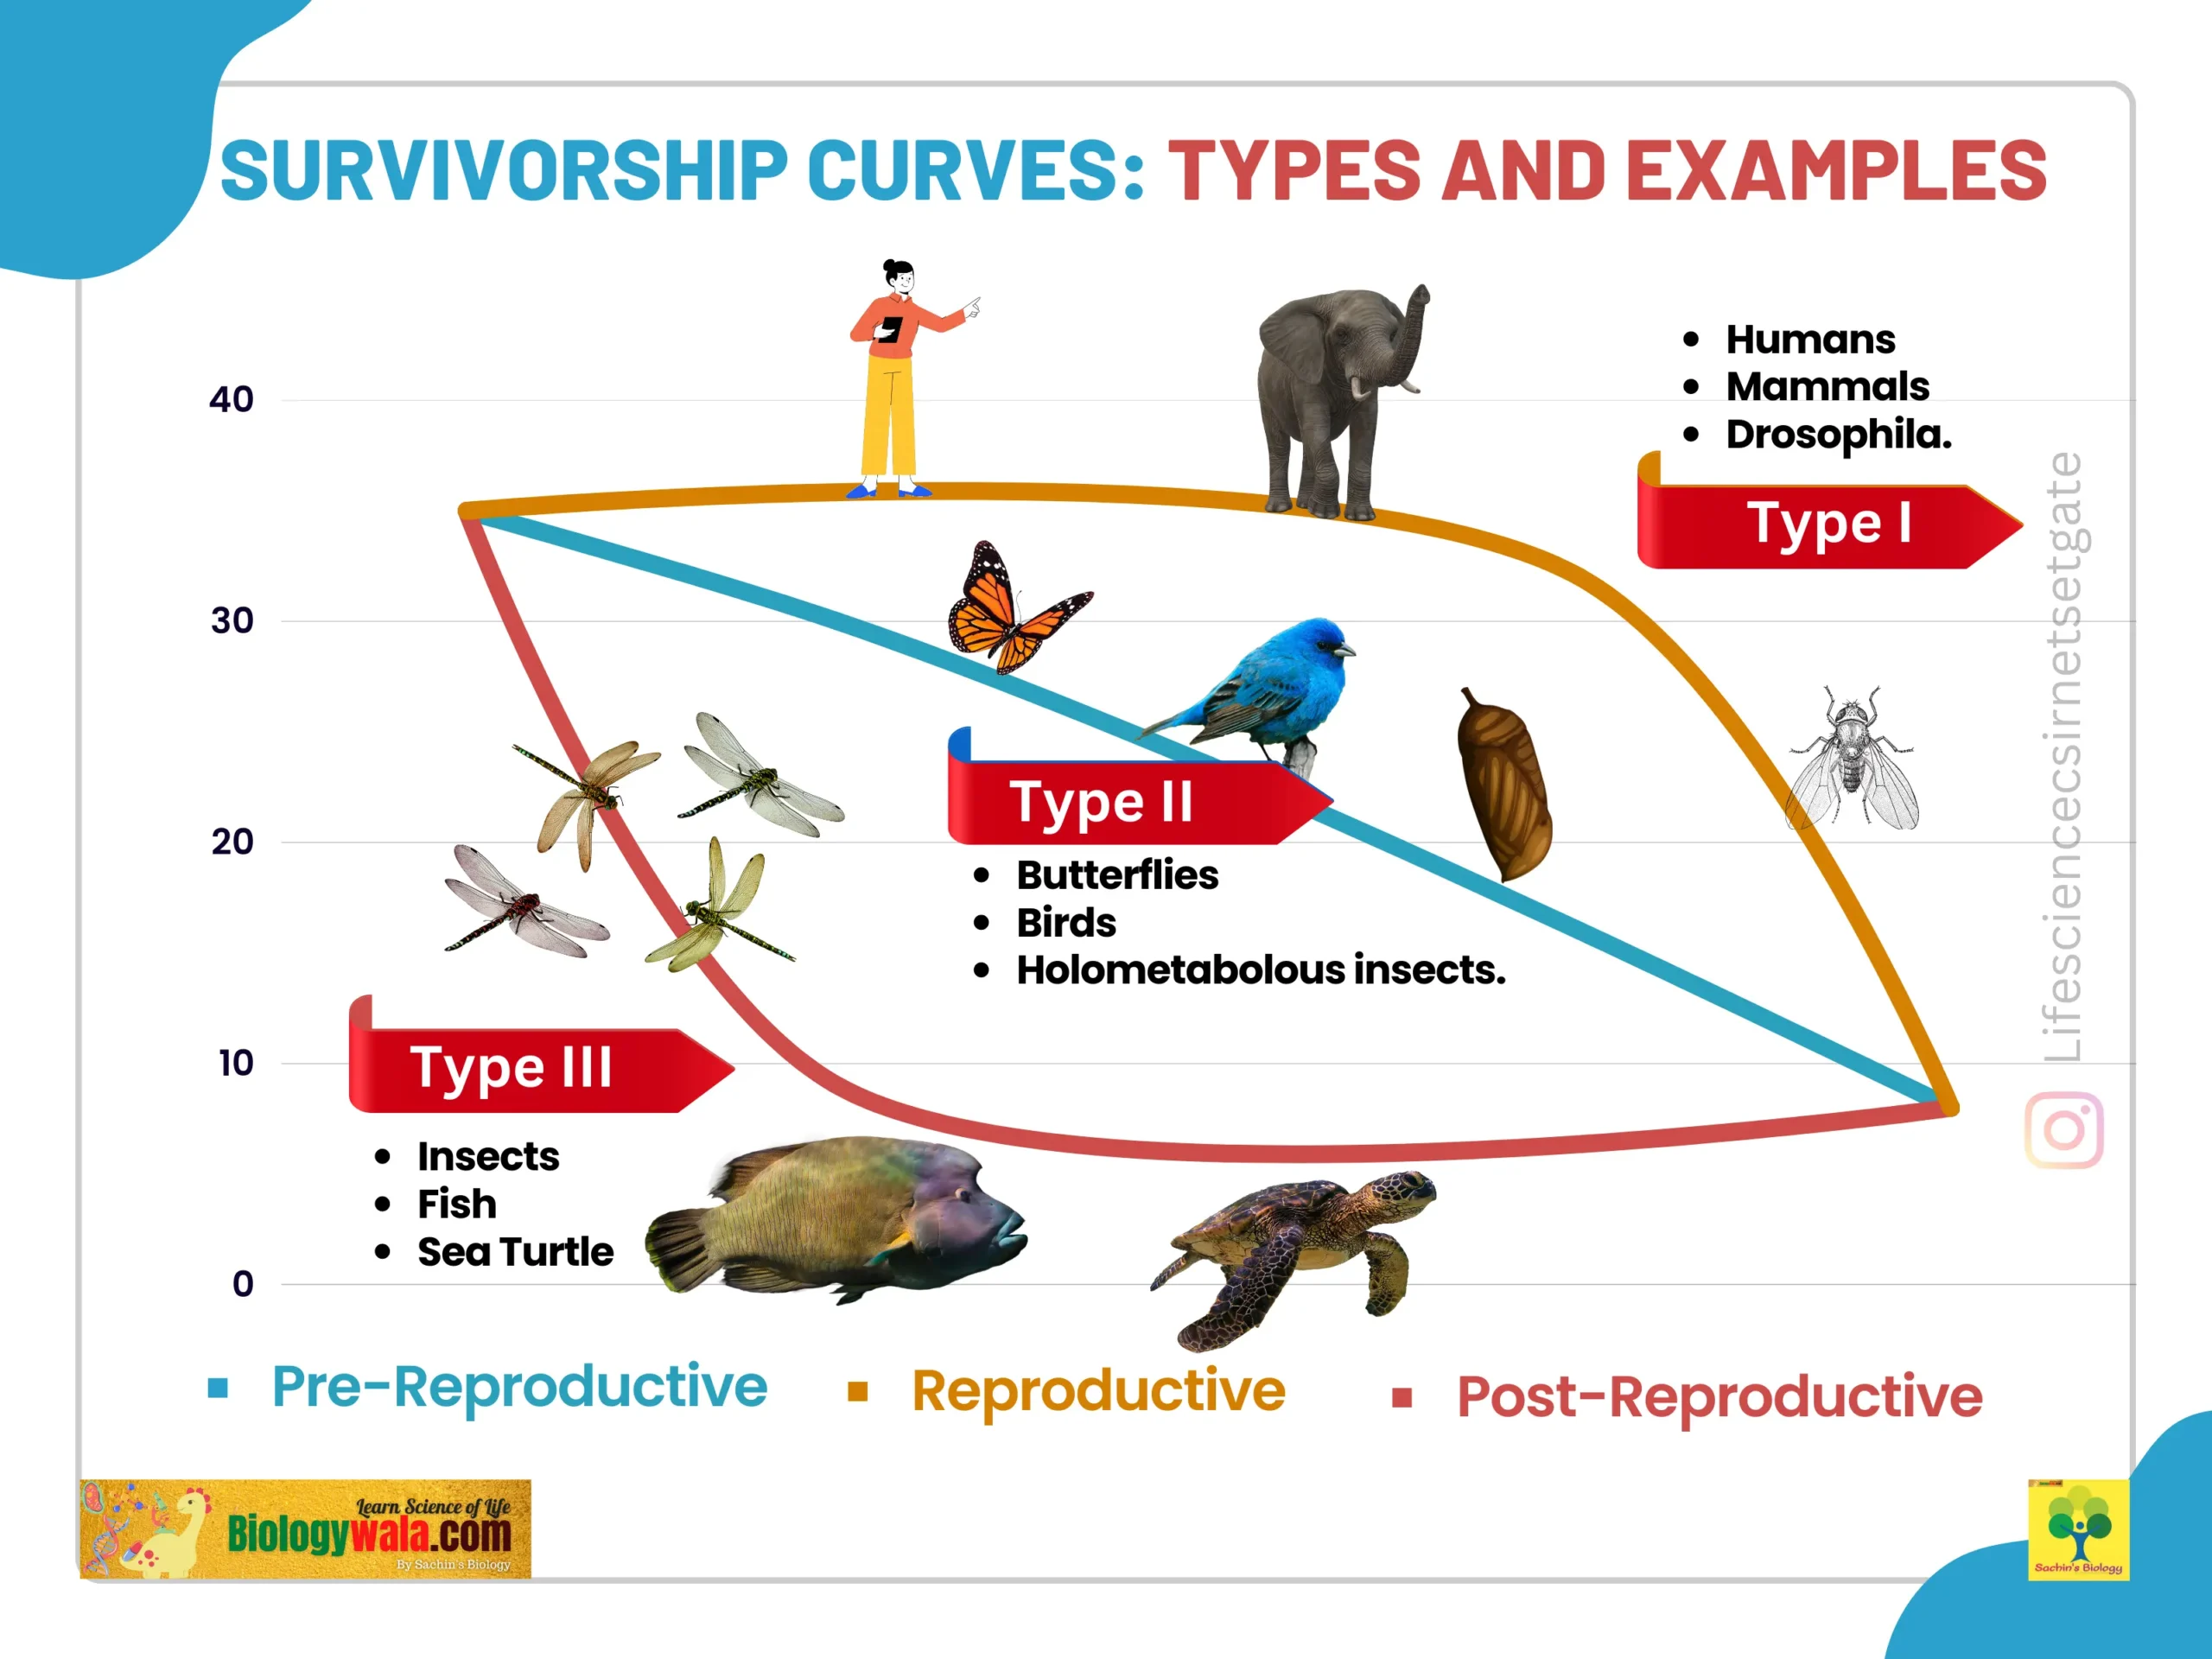 Survivorship curves types and examples